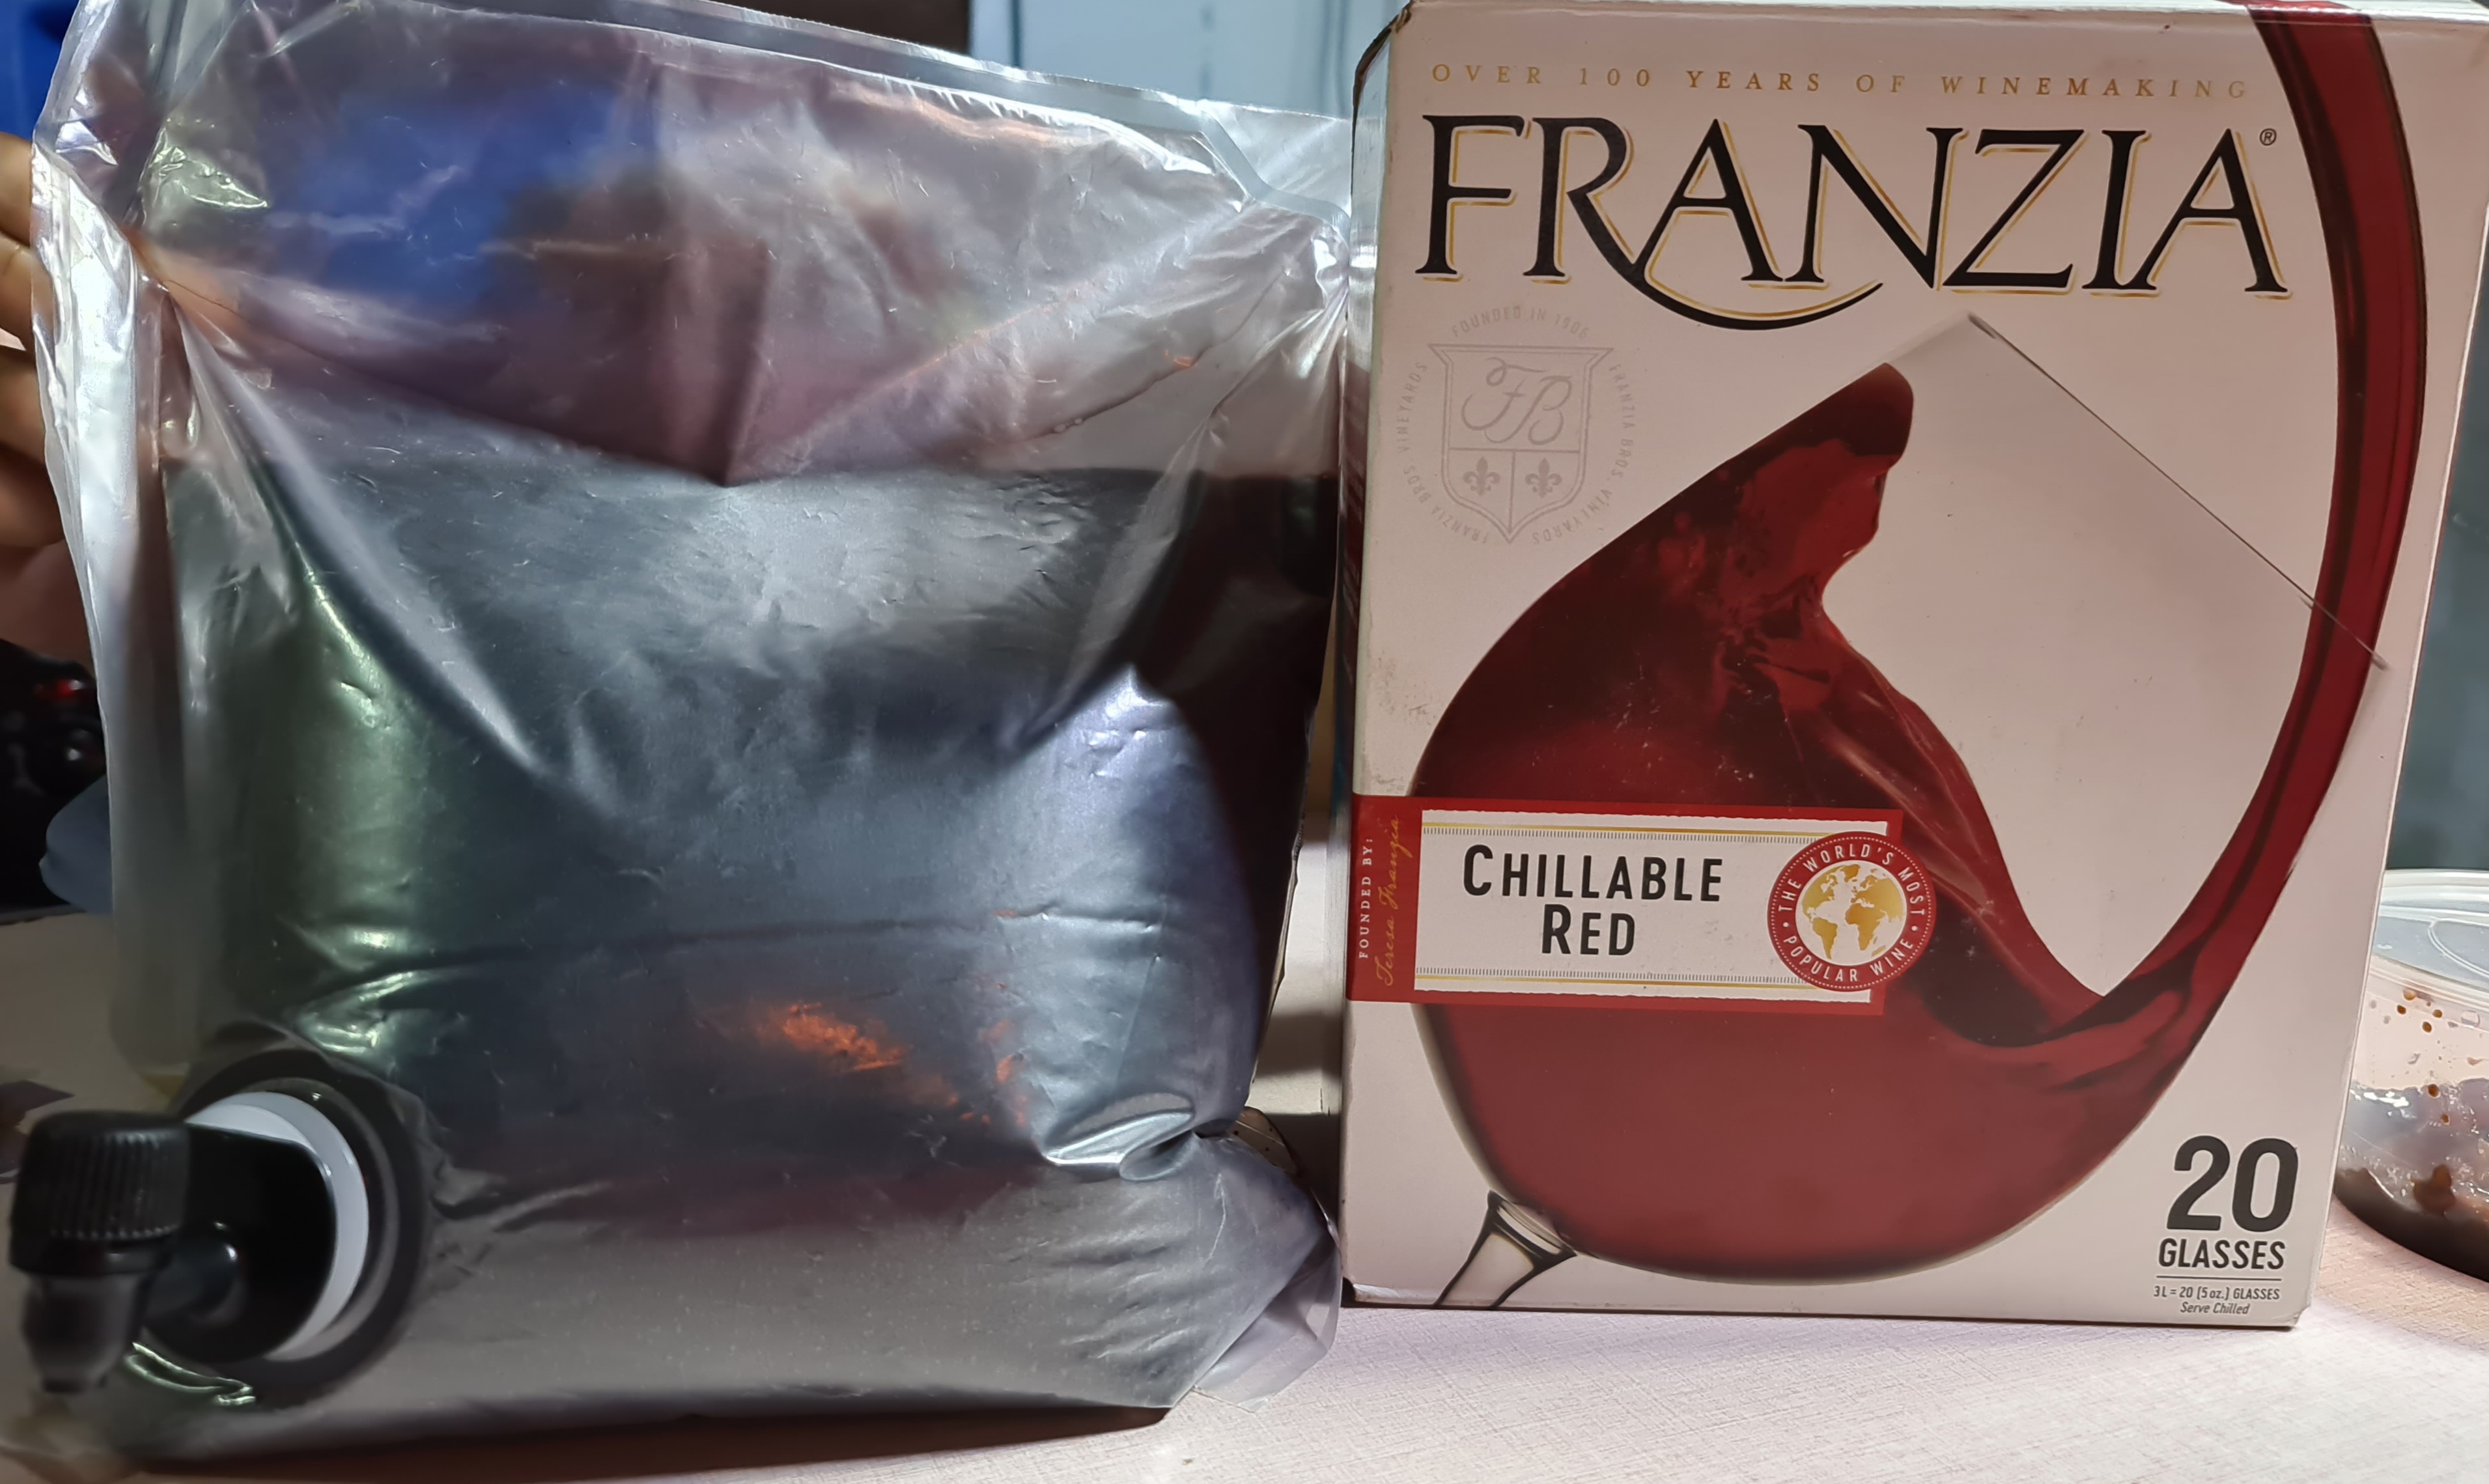 franzia-chillable-red-online-factory-save-48-jlcatj-gob-mx